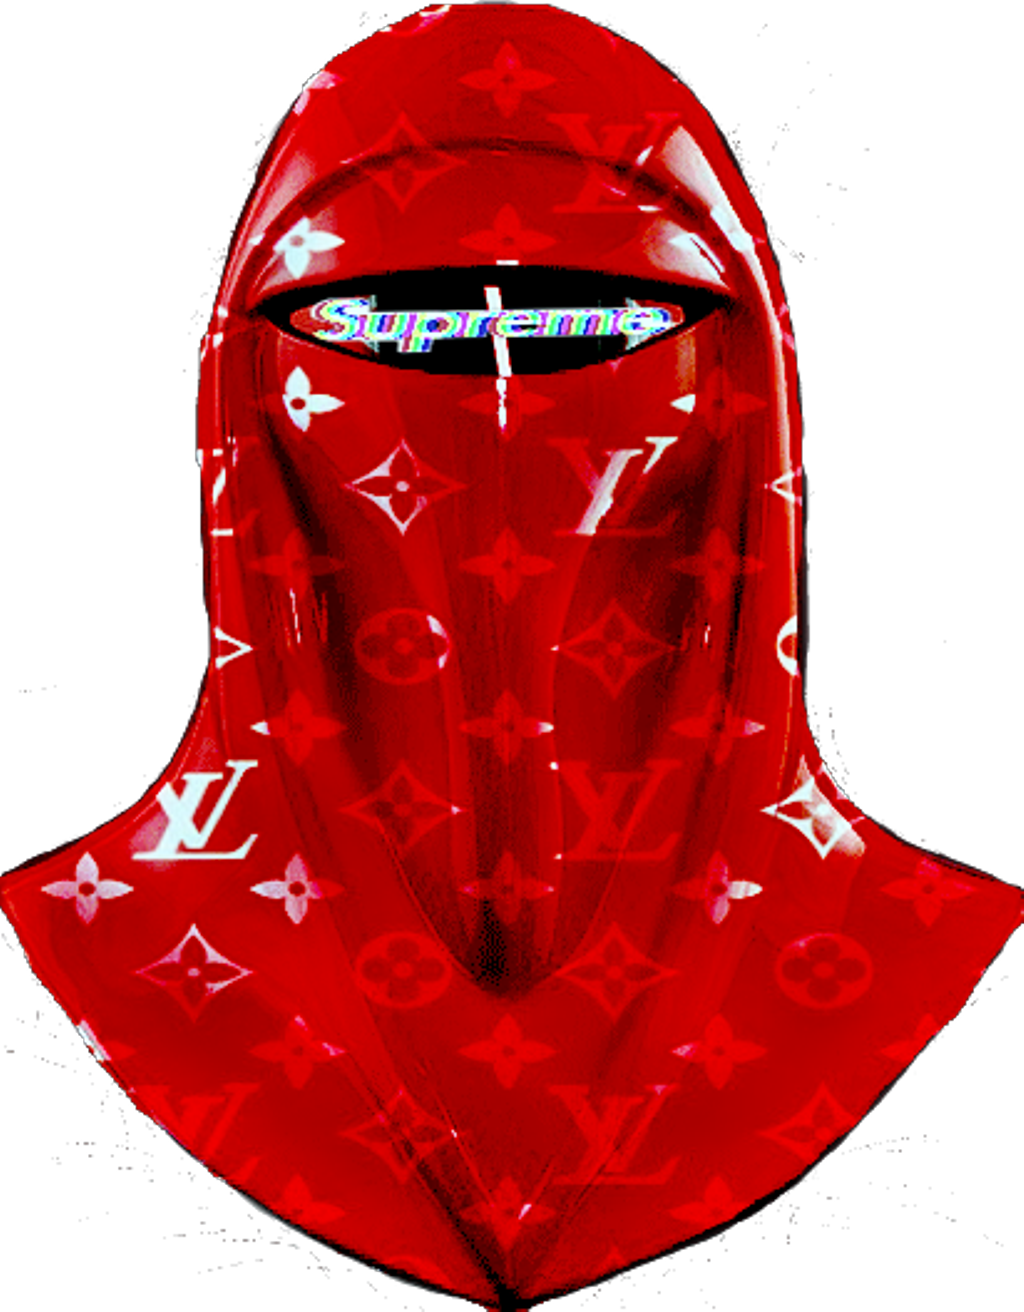 A Red Mask With White Logos